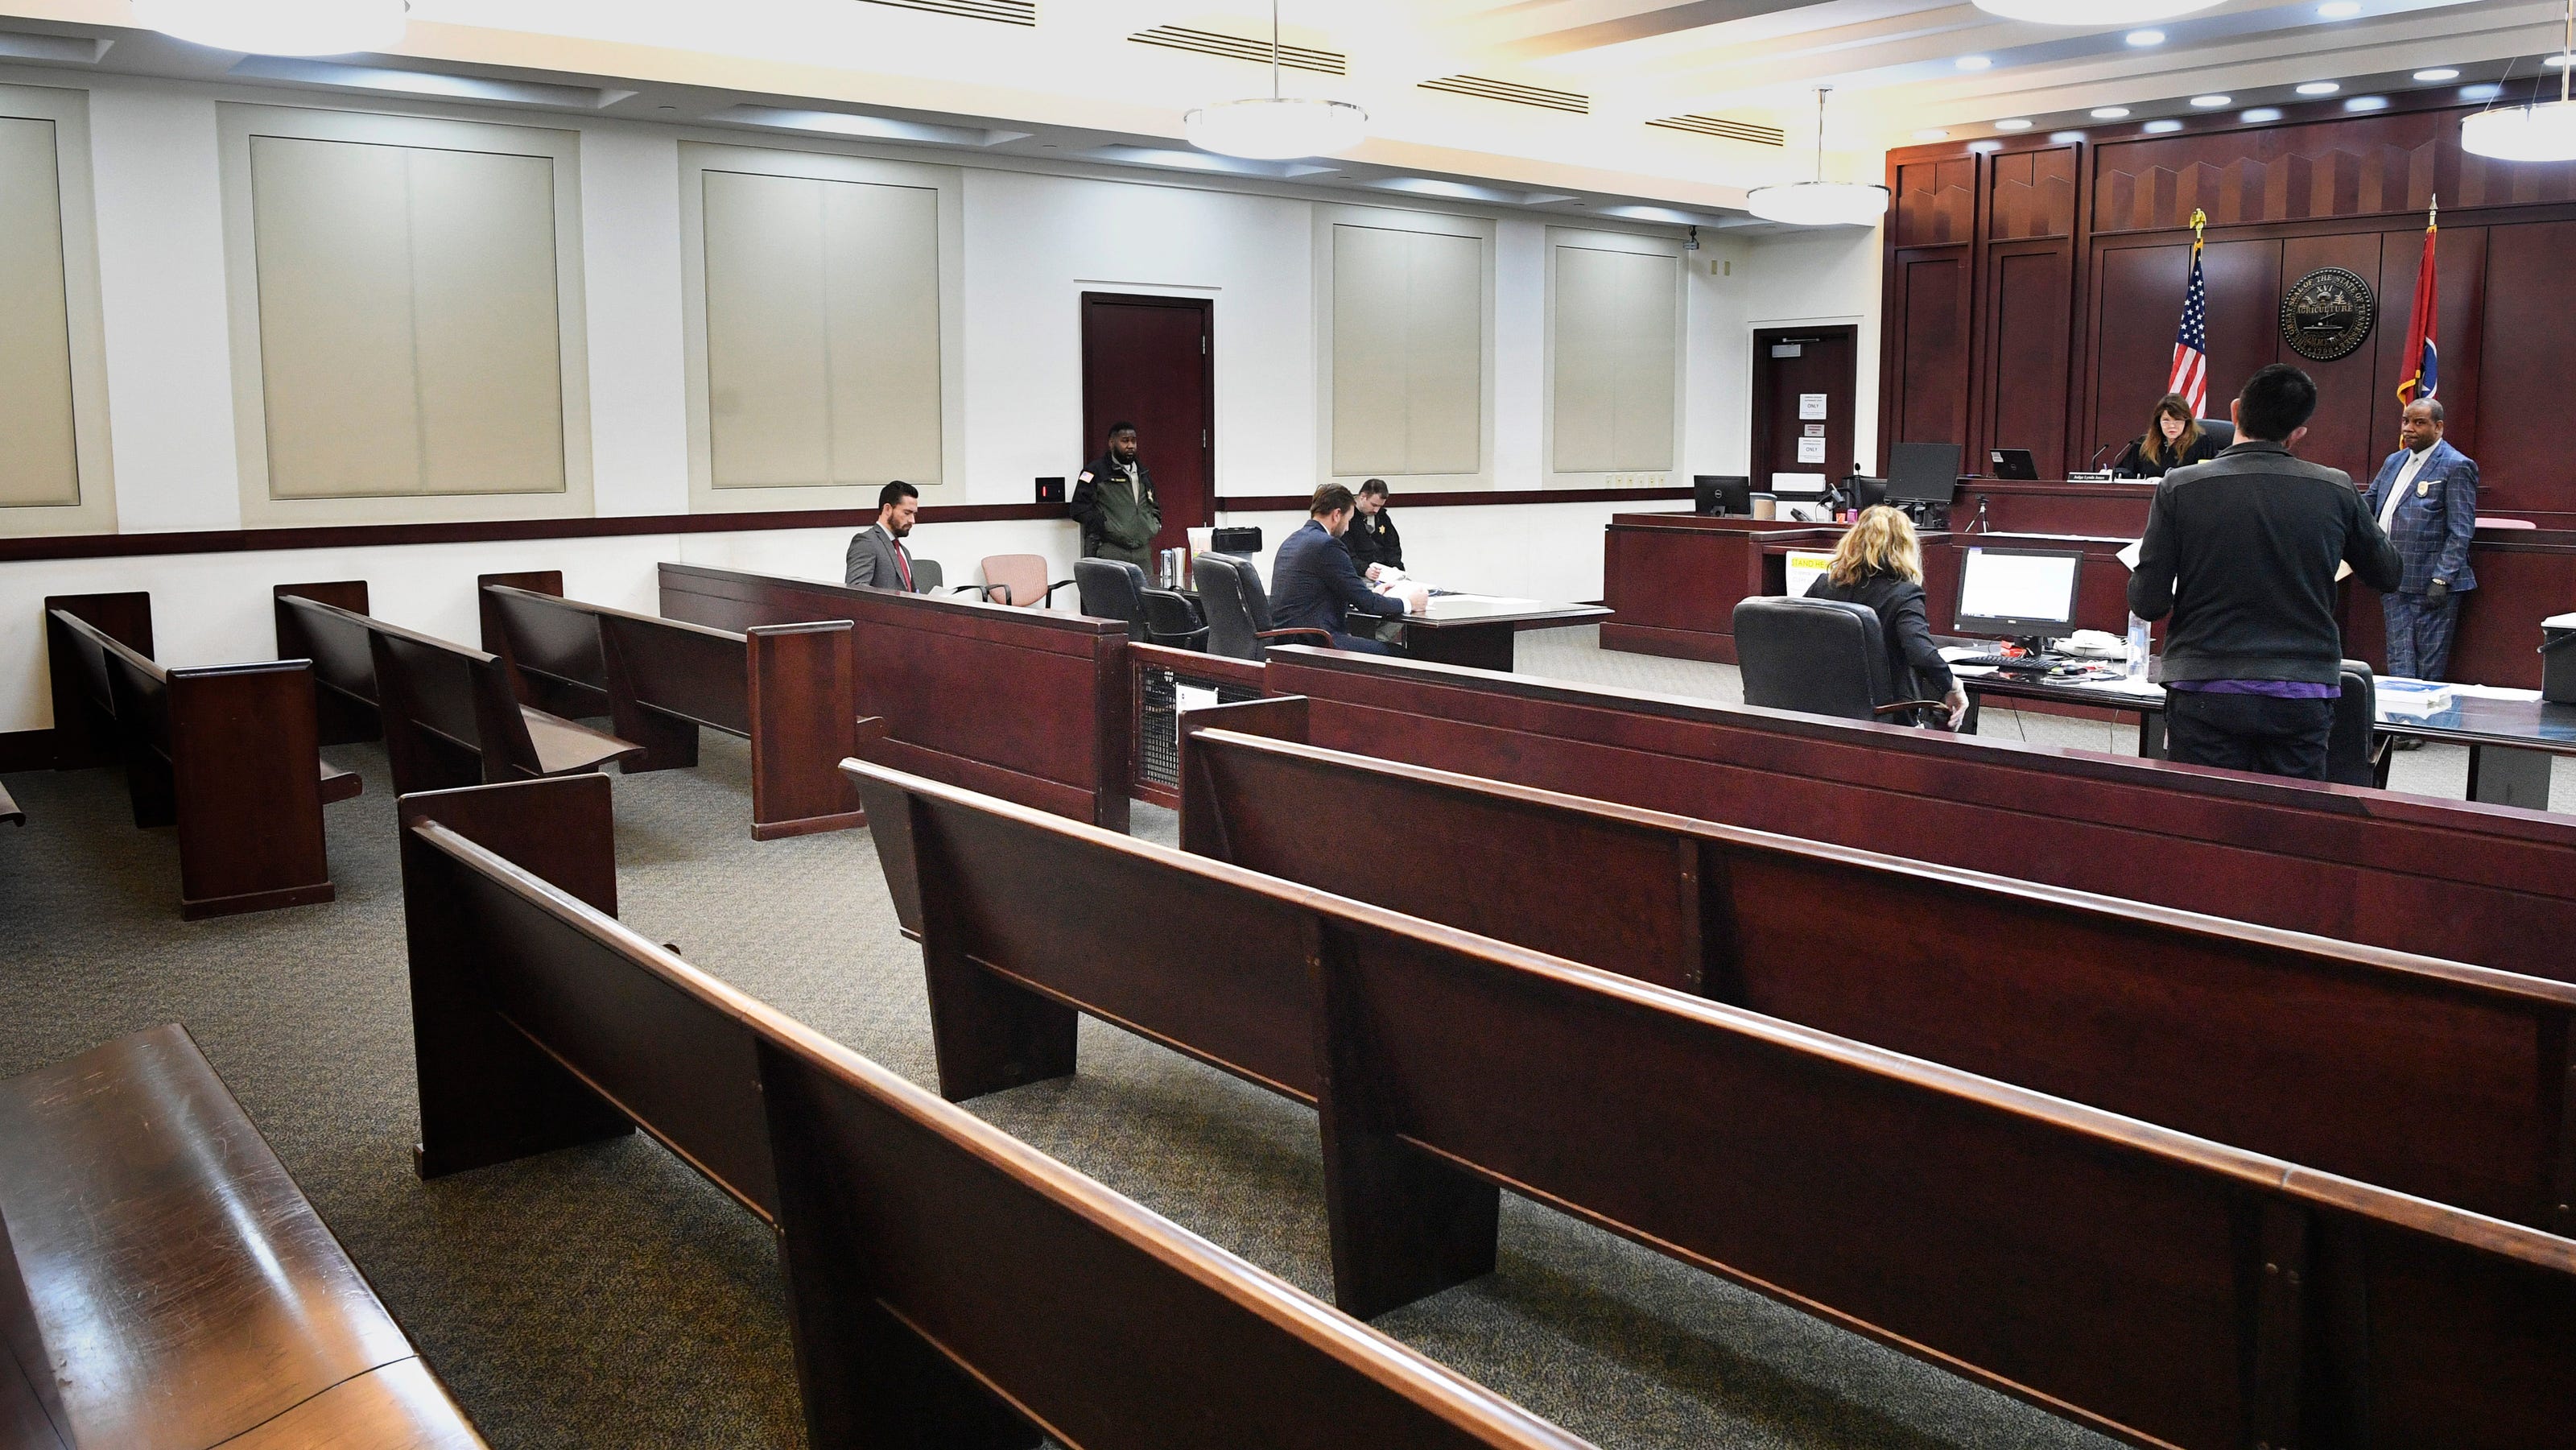 How Davidson County criminal court could reopen under social distancing